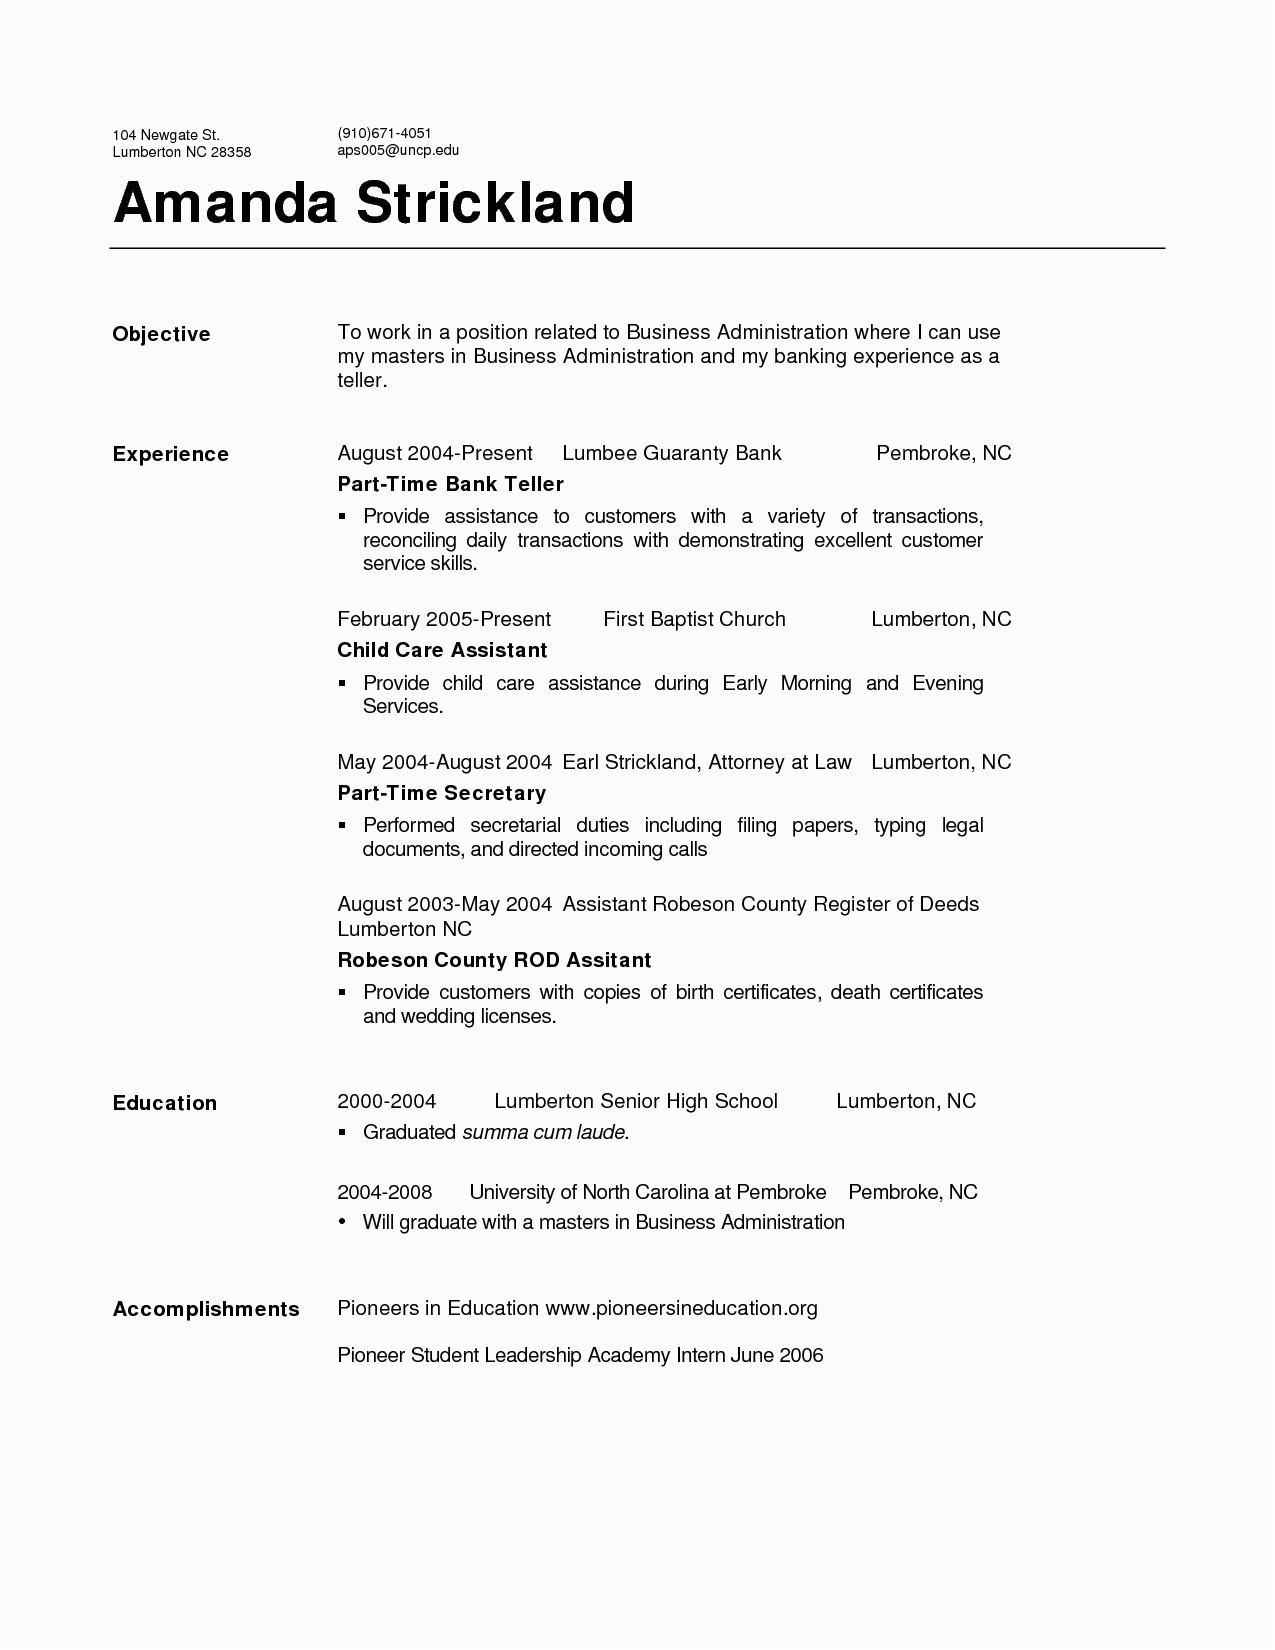 Sample Resume for Bank Teller Position with No Experience Sample Bank Teller Resume No Experiencecareer Resume Template